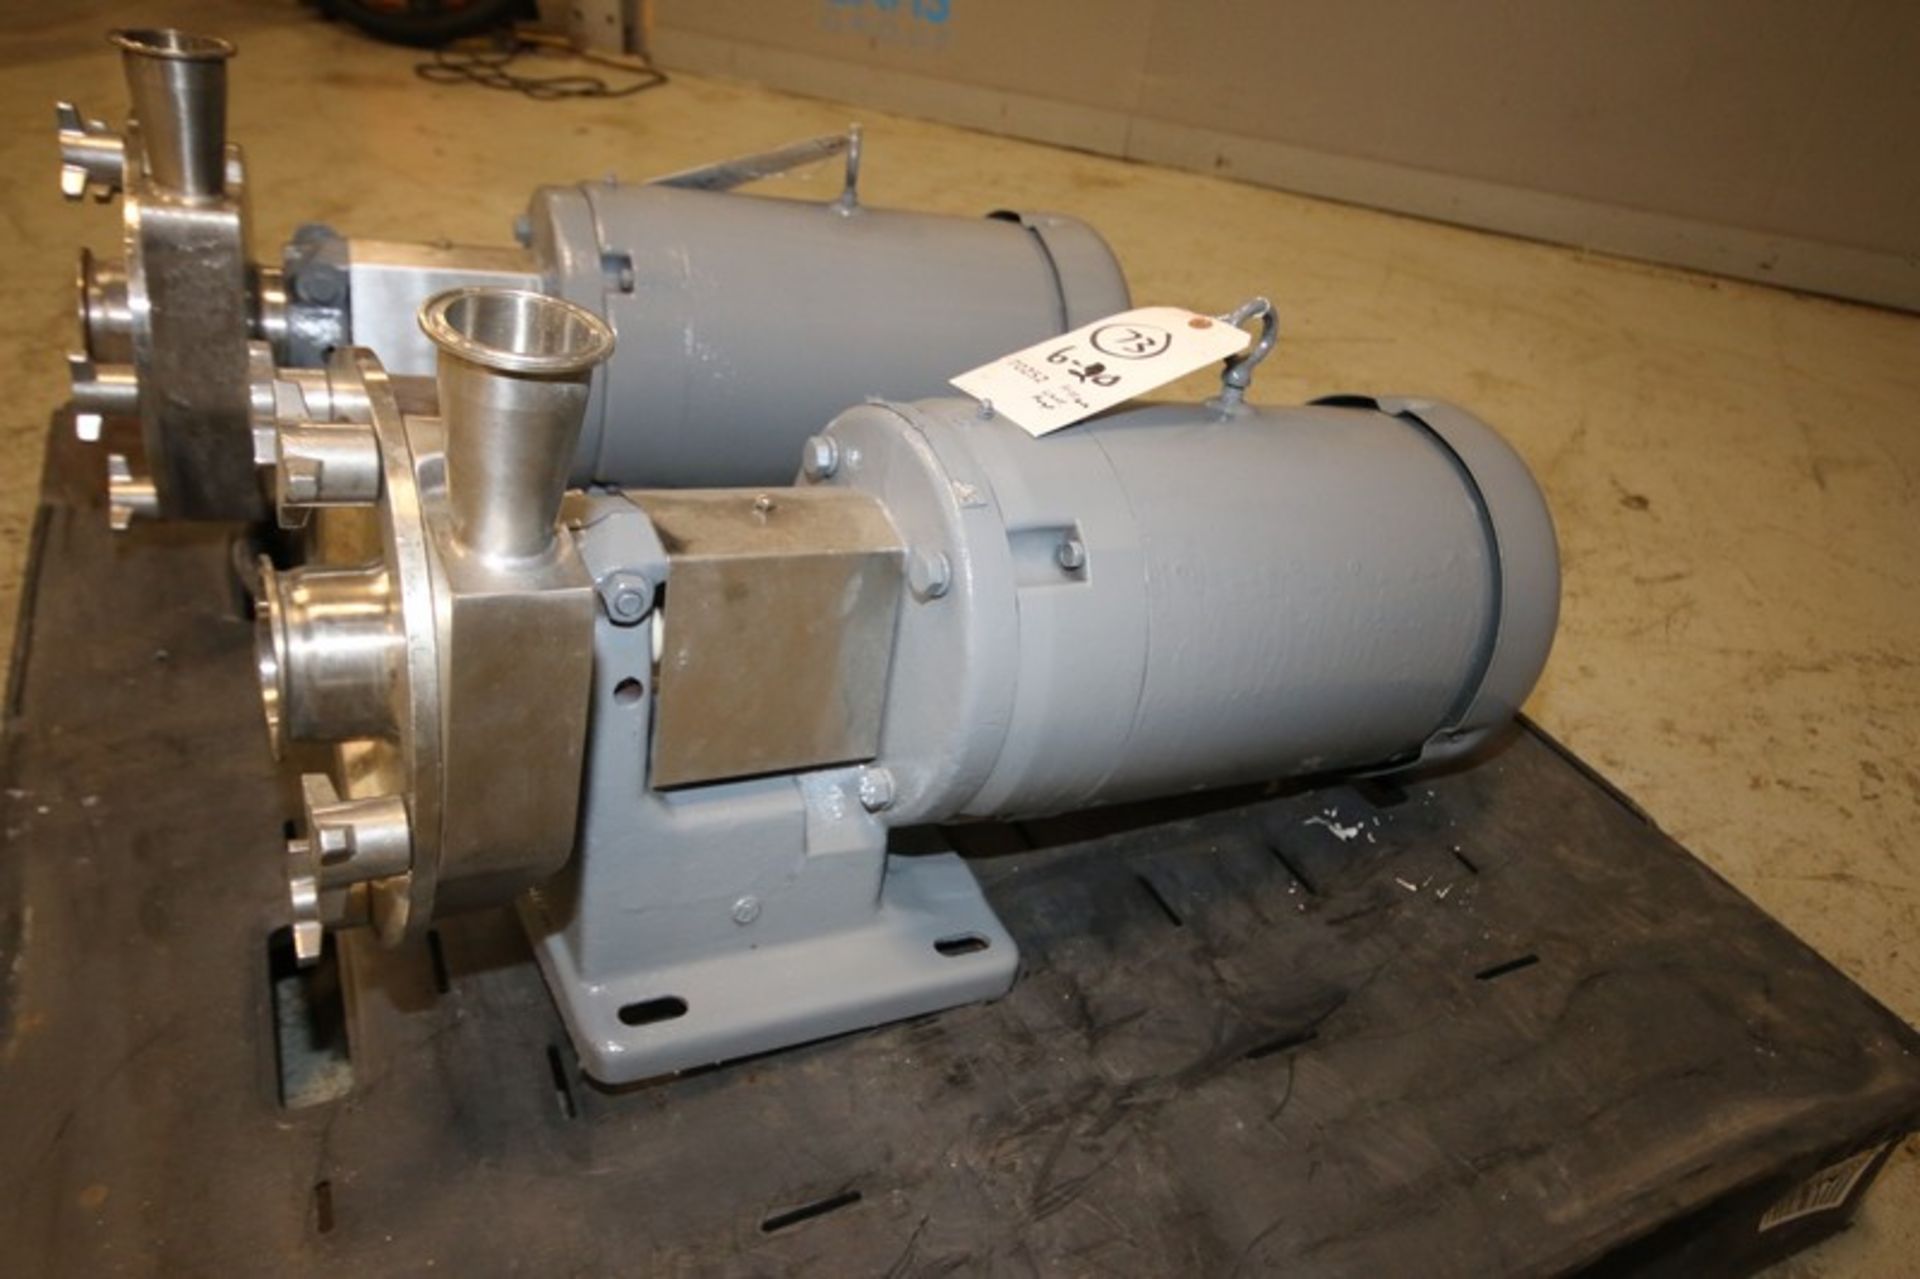 Fristam Aprox. 10 hp Centrifugal Pump, S/N FP17320203057, with Aprox. 2" x 3" Clamp Type Inlet/